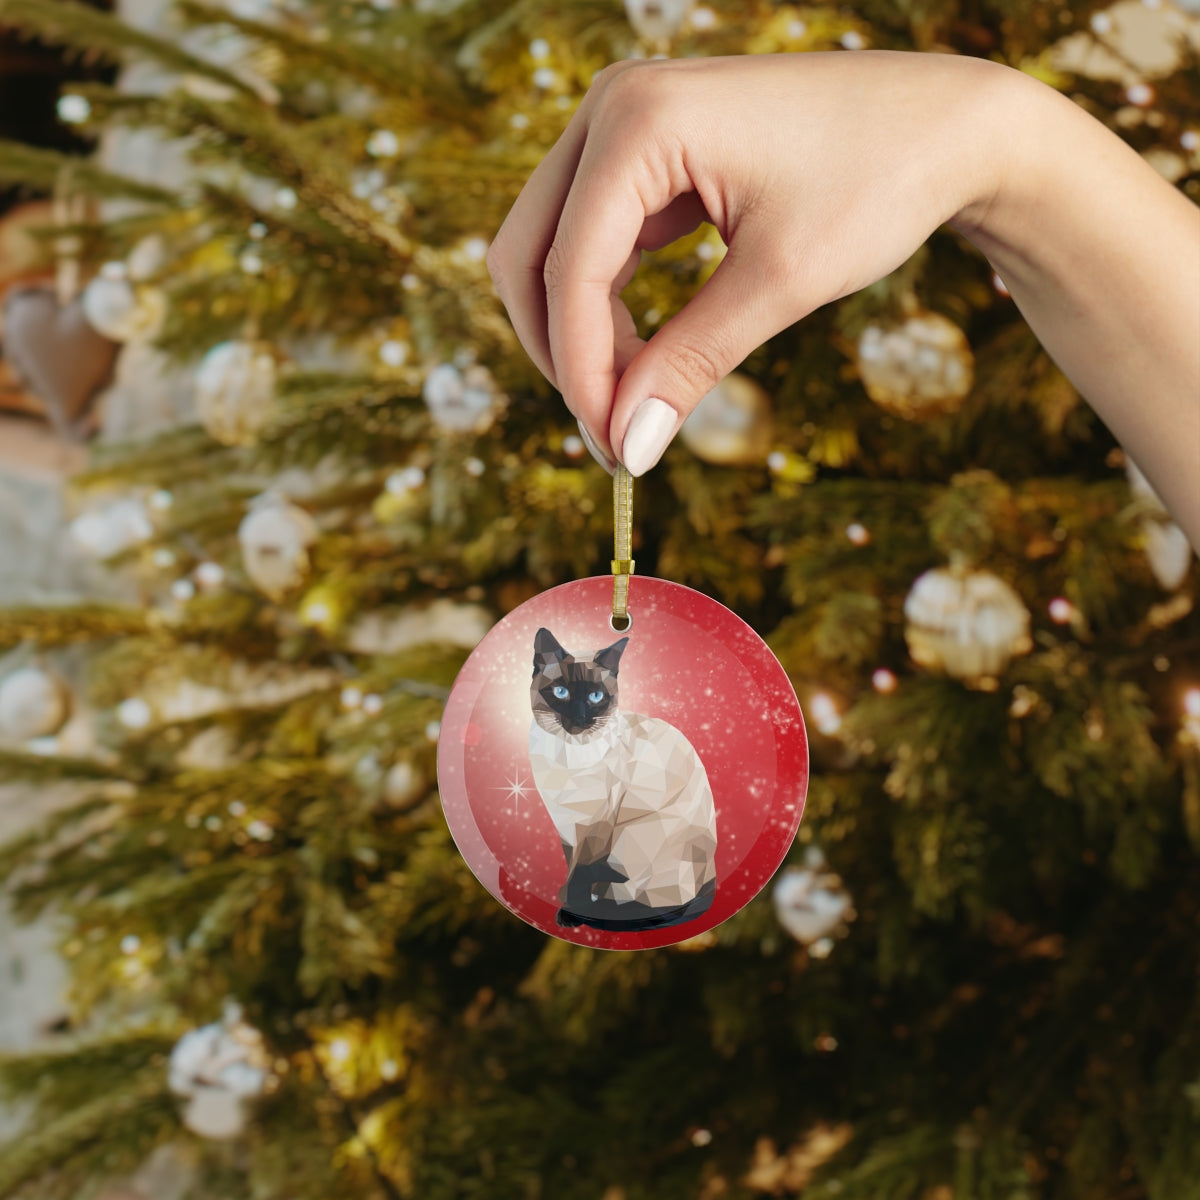 Compelling Cat Luxurious Christmas Glass Ornament